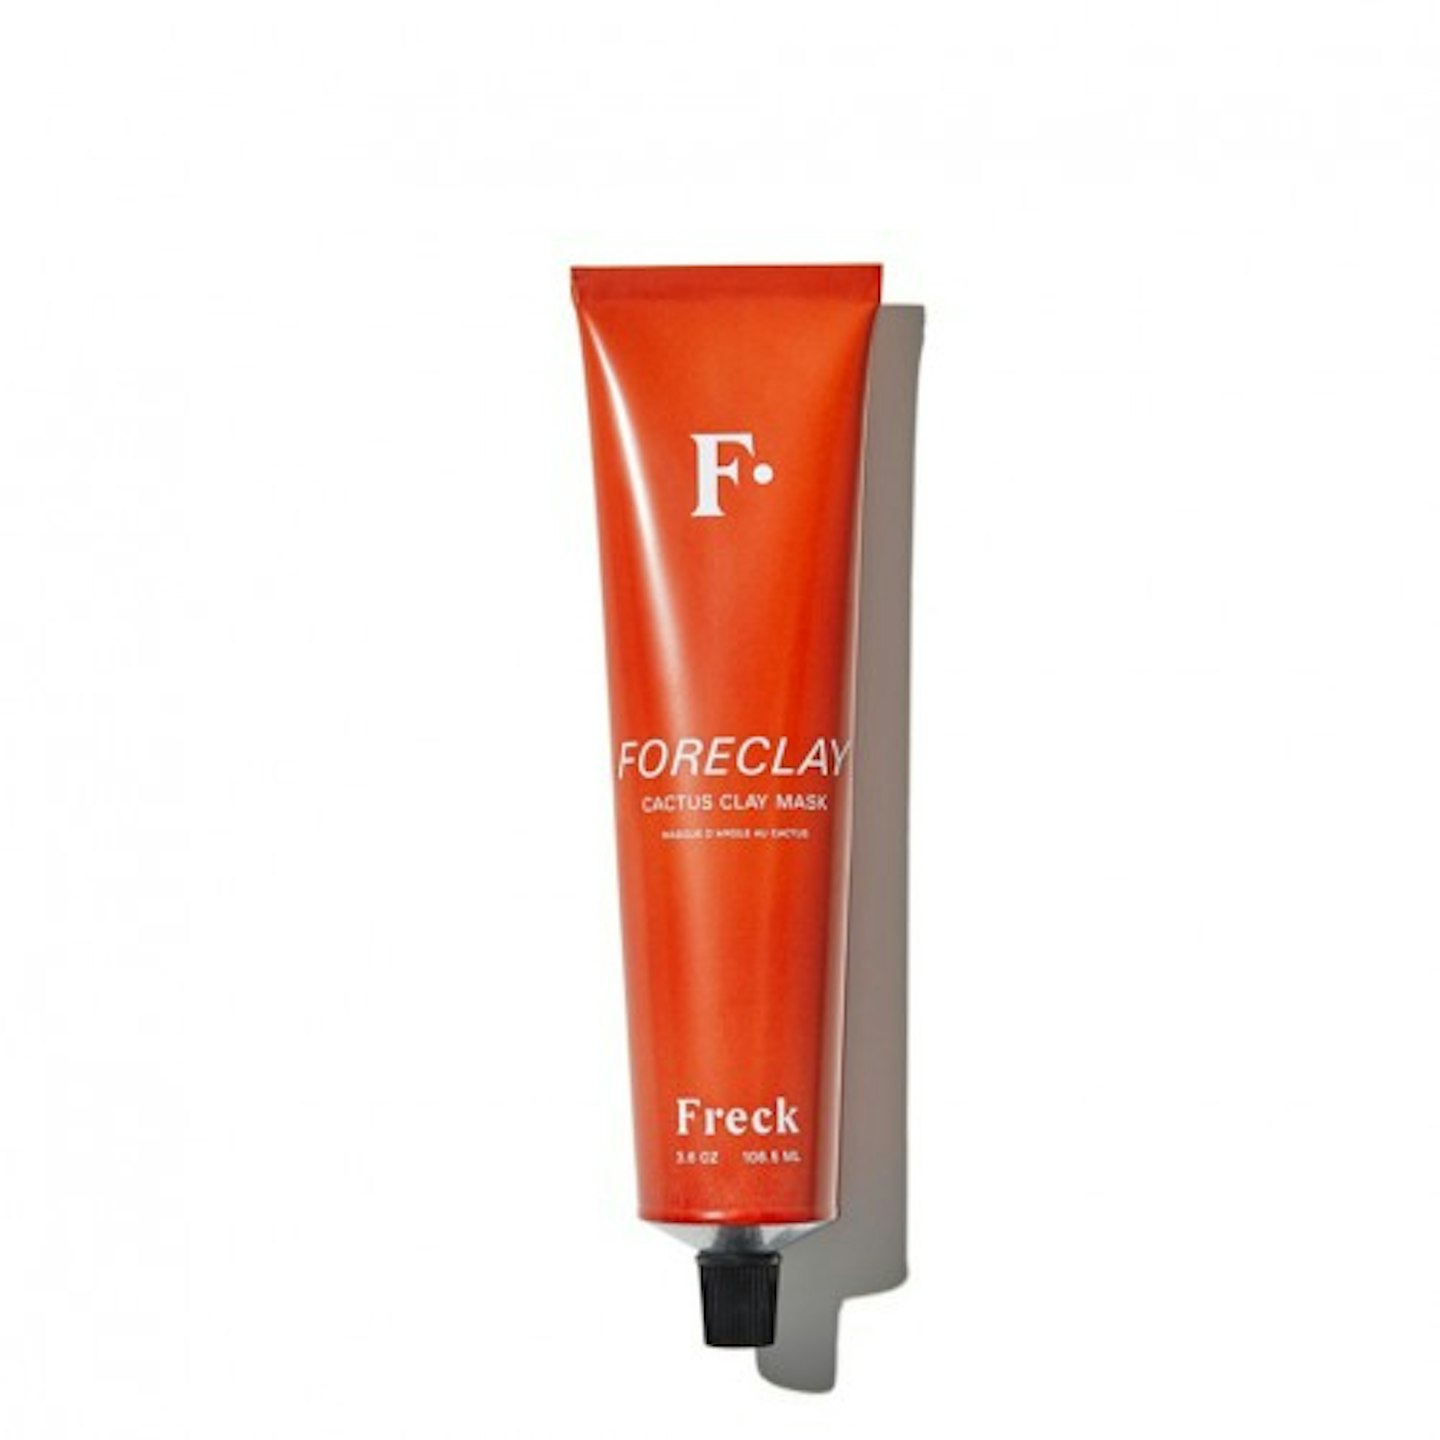 Freck Foreclay Cactus Clay Mask, £18.50